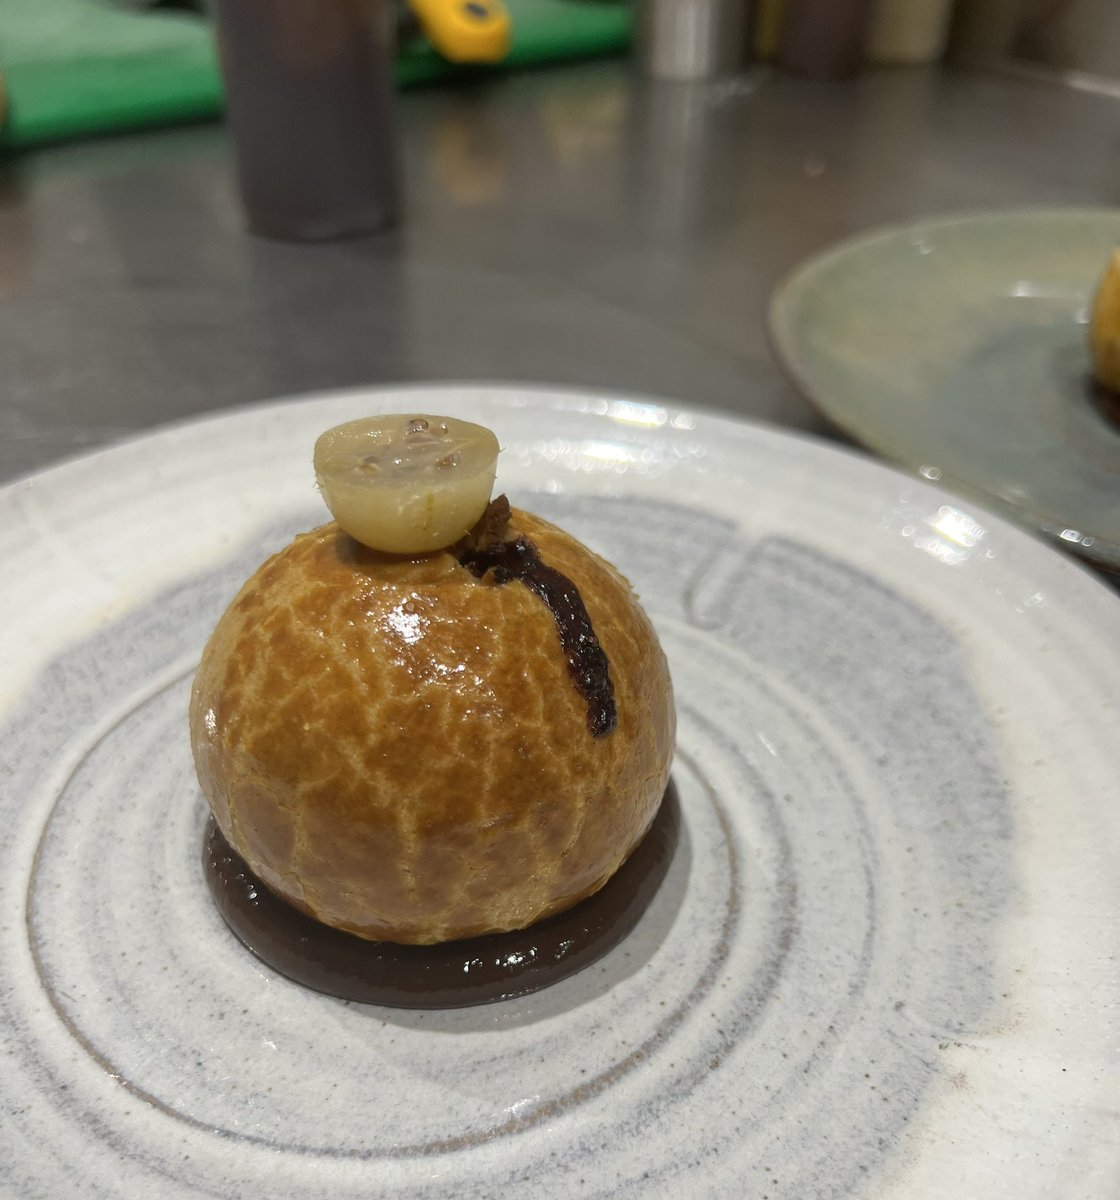 On the menu this week, smoked rabbit pie, brown butter pastry, gooseberry sauce… @MichelinGuideUK #MICHELINSTAR22